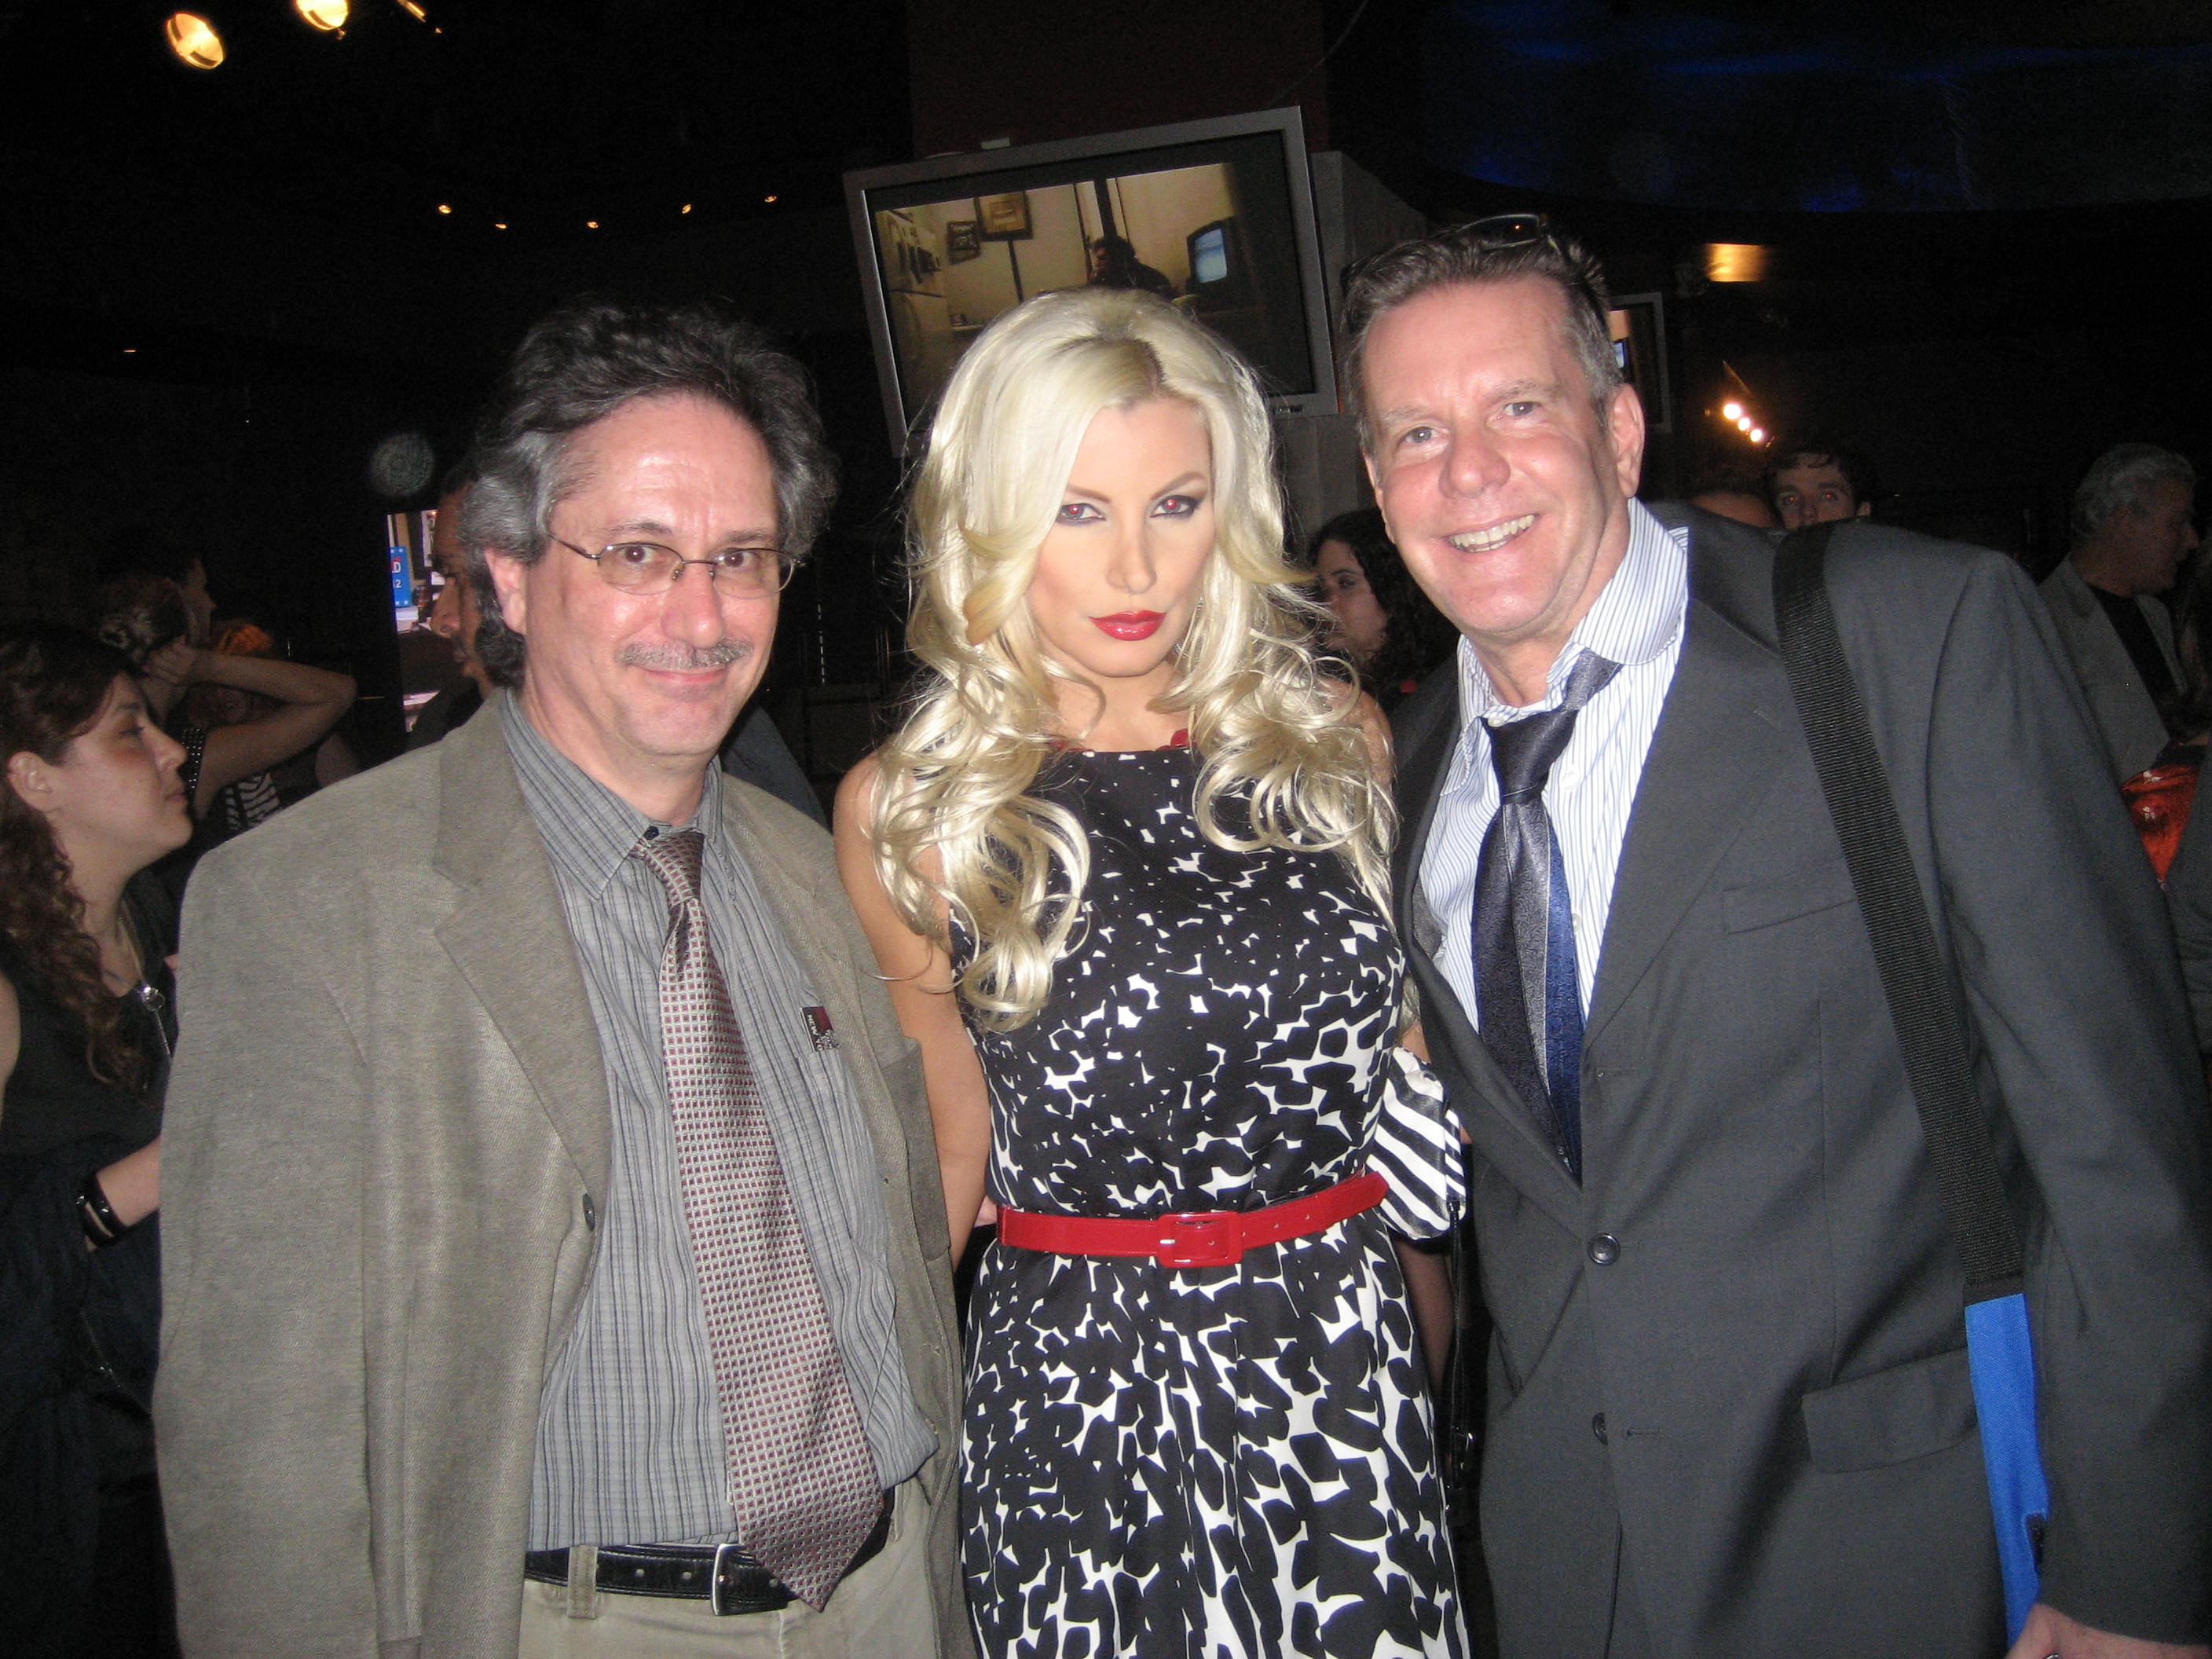 Opening Night, NYC, April 28, 2011, Paul Brenner, Brittany Andrews and Paul Kelly.